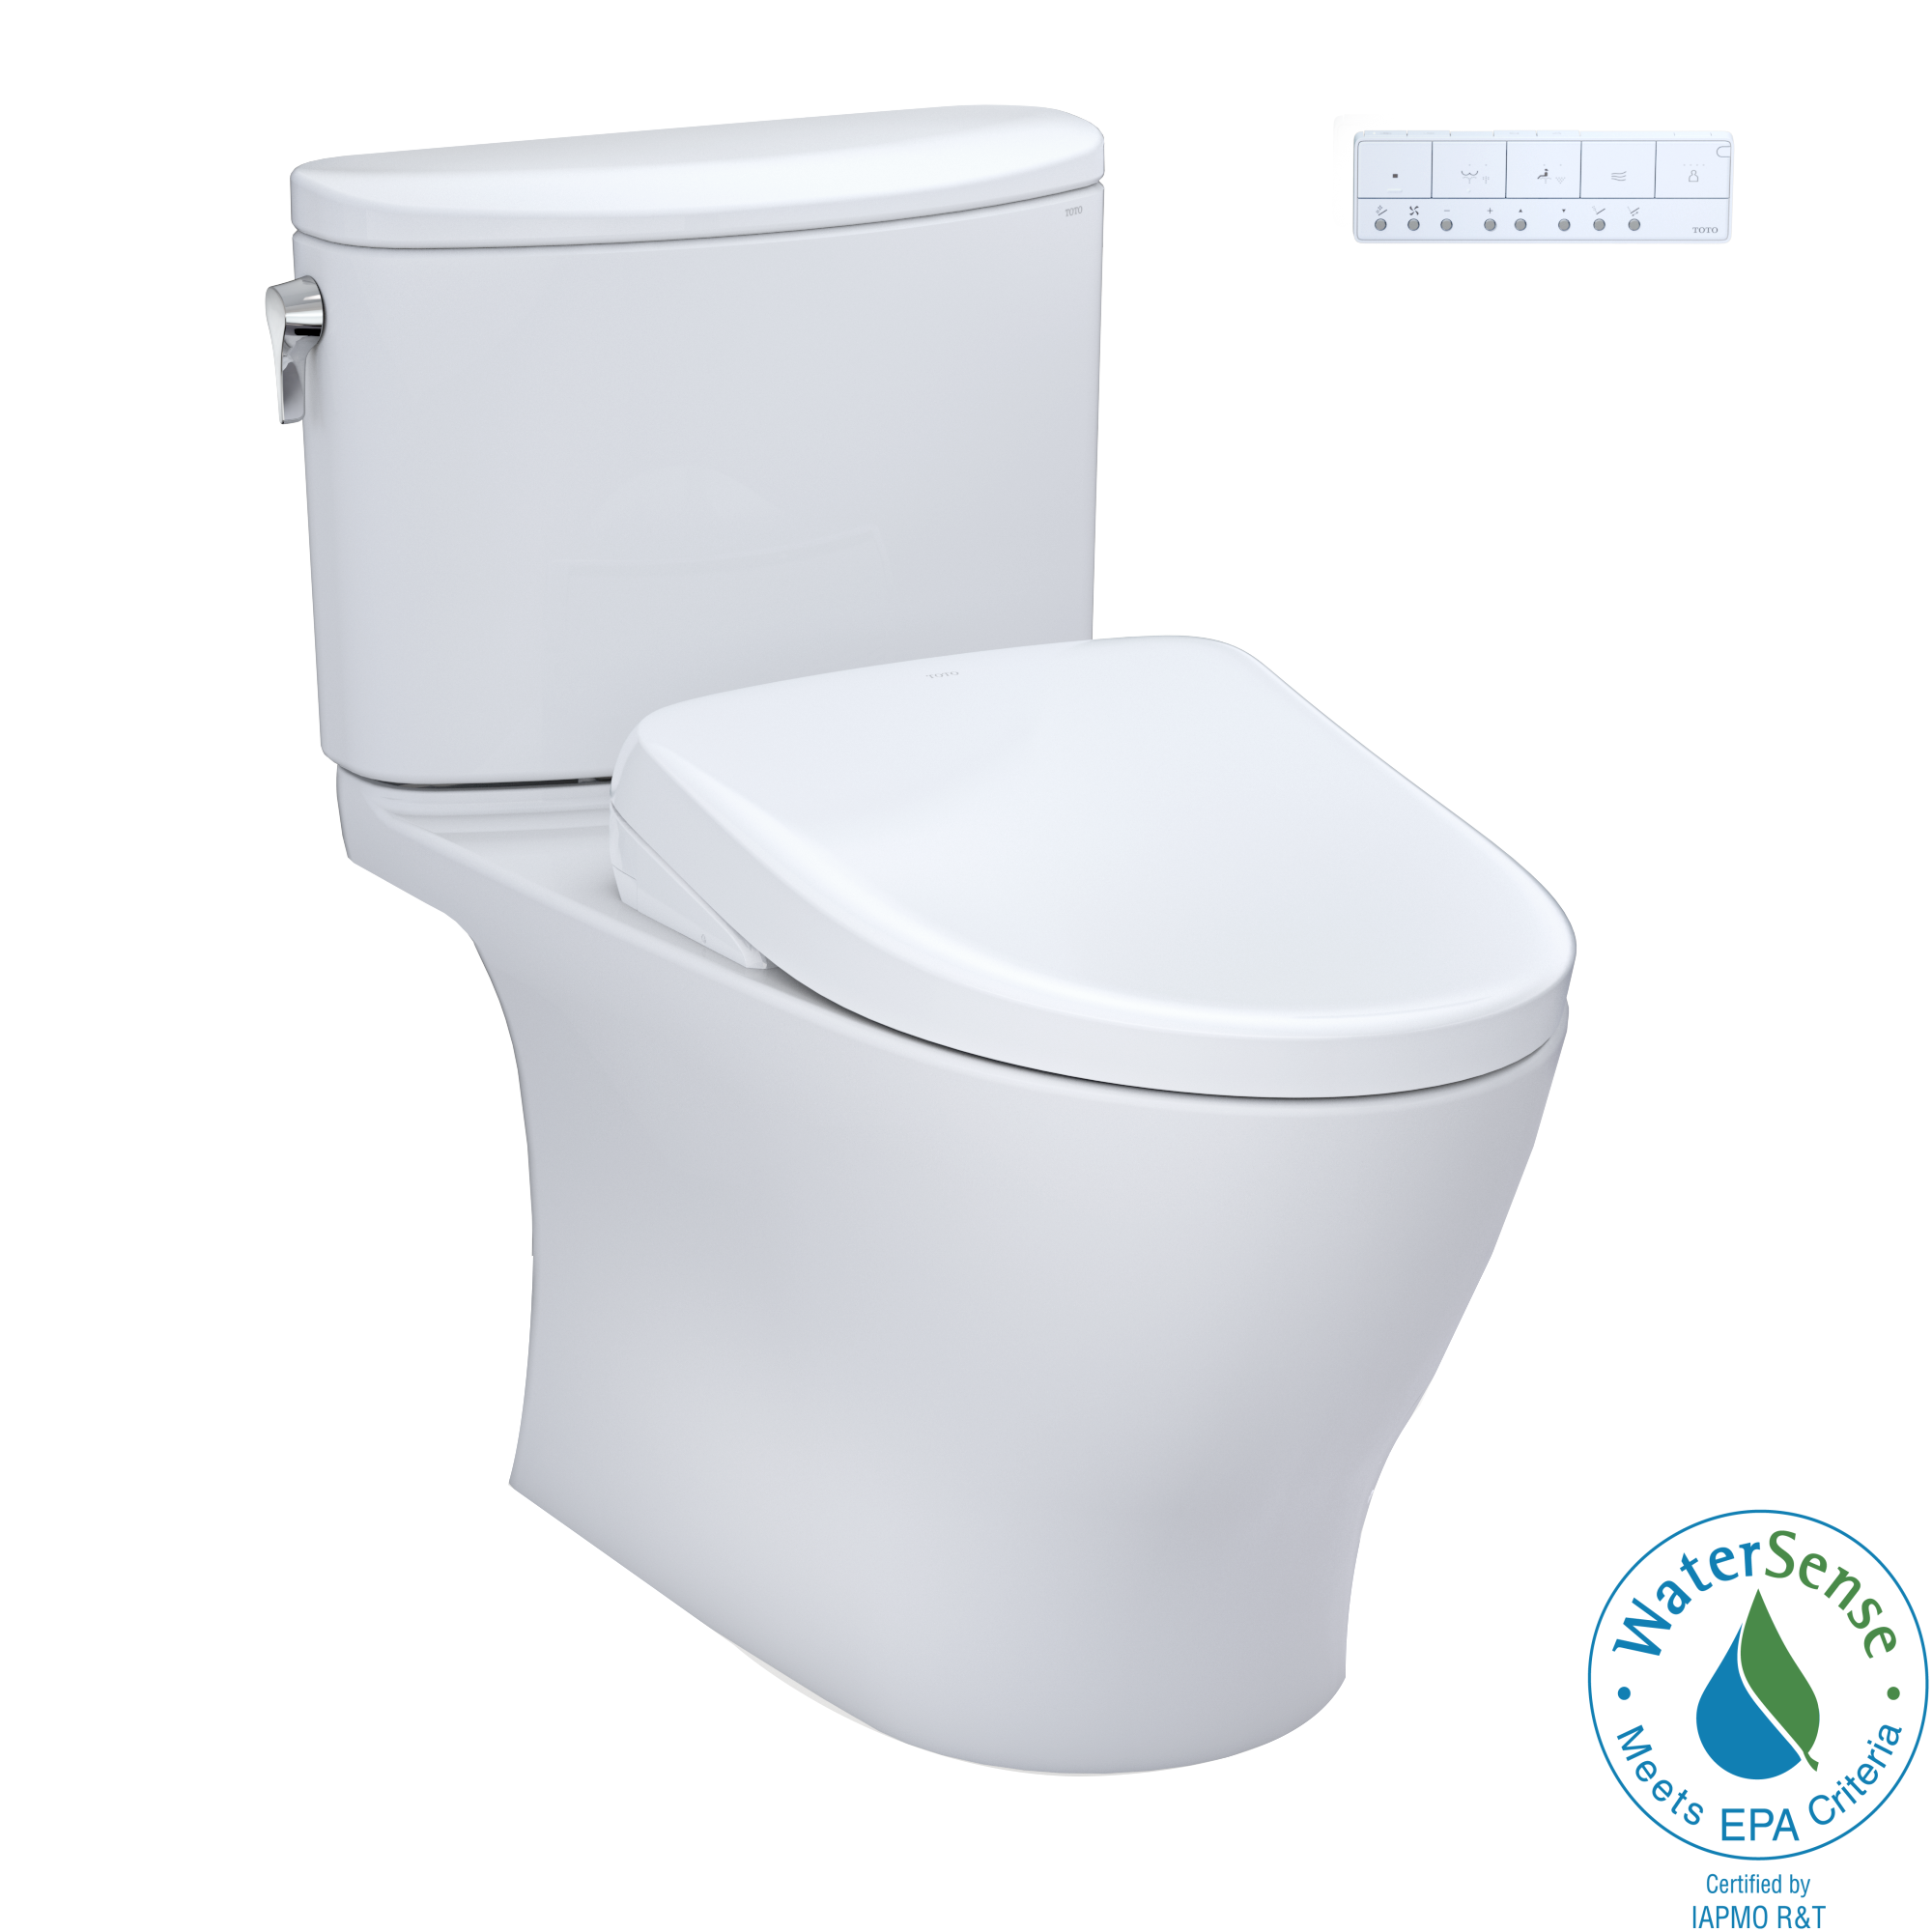 TOTO WASHLET+ Nexus 1G Two-Piece Elongated 1.0 GPF Toilet with S7A Contemporary Bidet Seat, Cotton White - MW4424736CUFG#01, MW4424736CUFGA#01